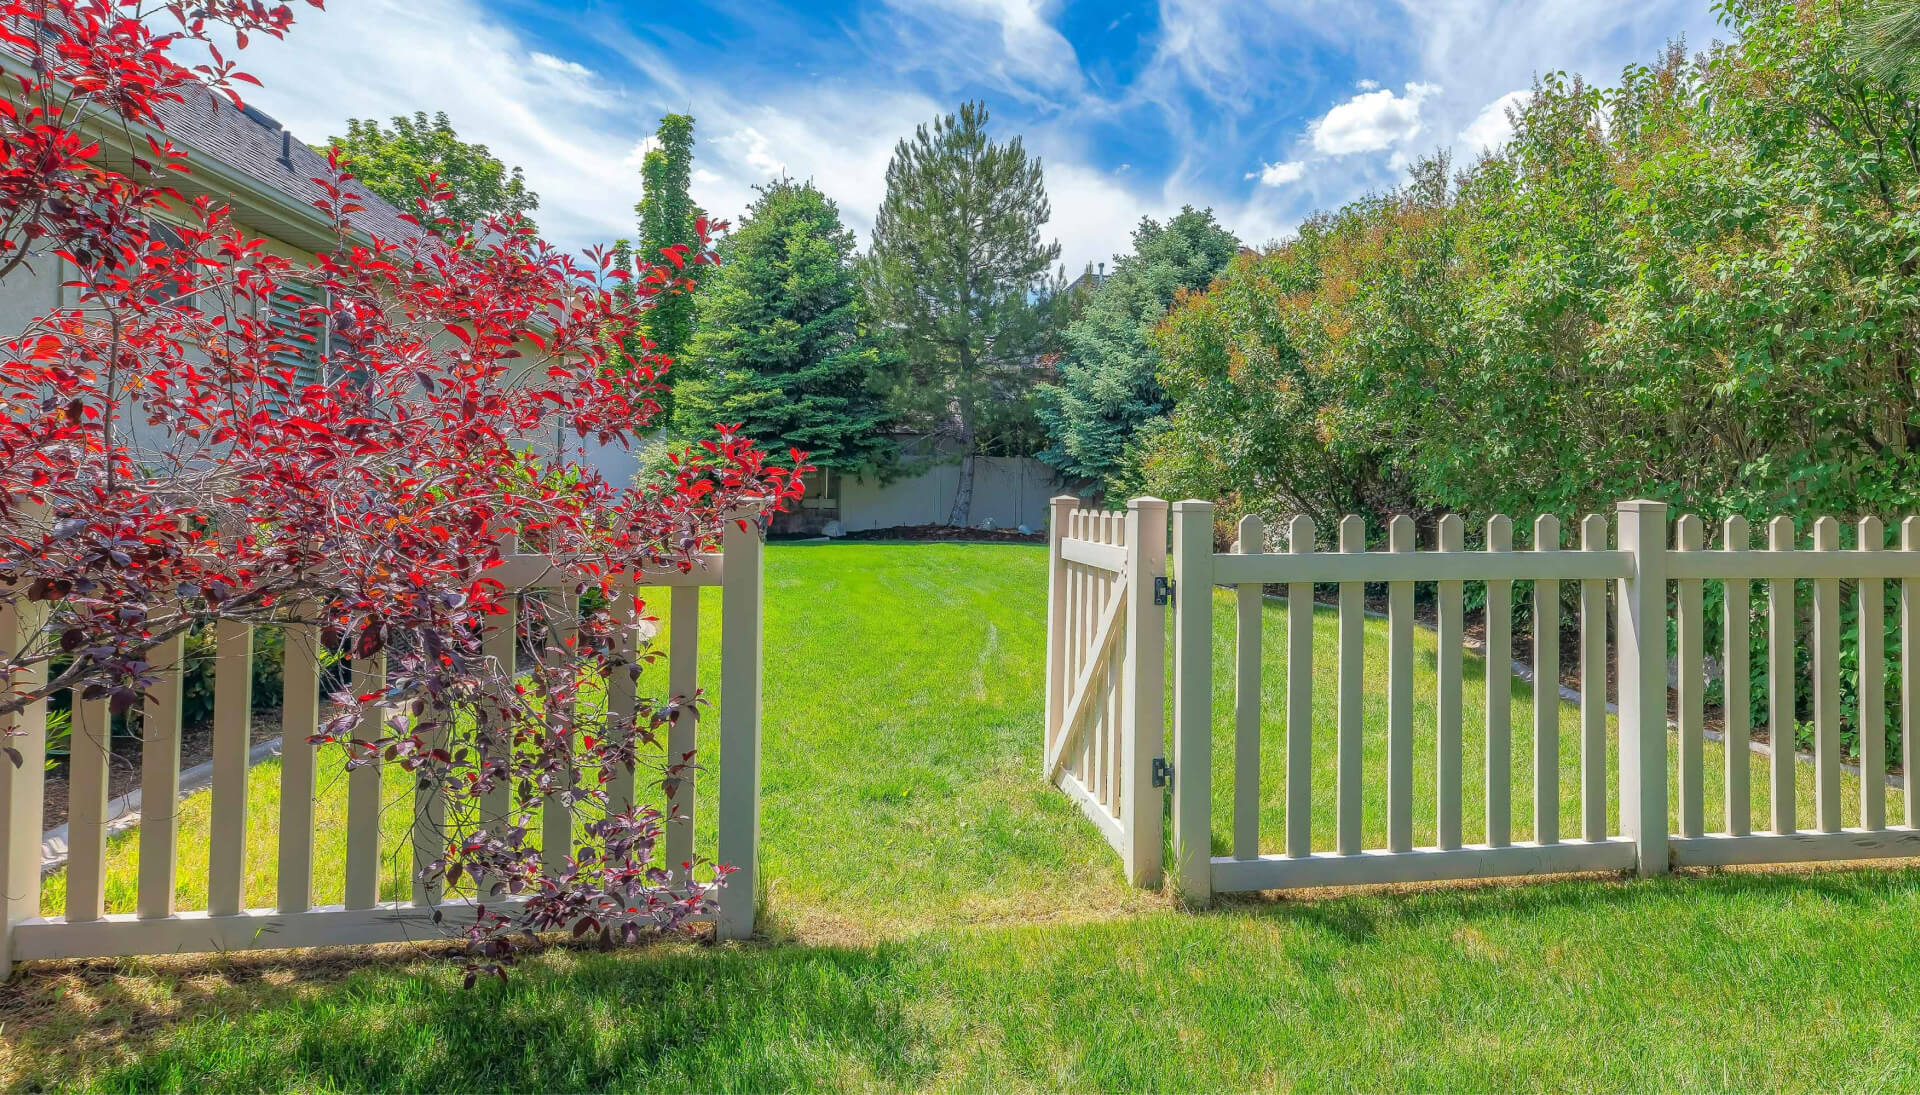 Fence gate installation services in Greenville